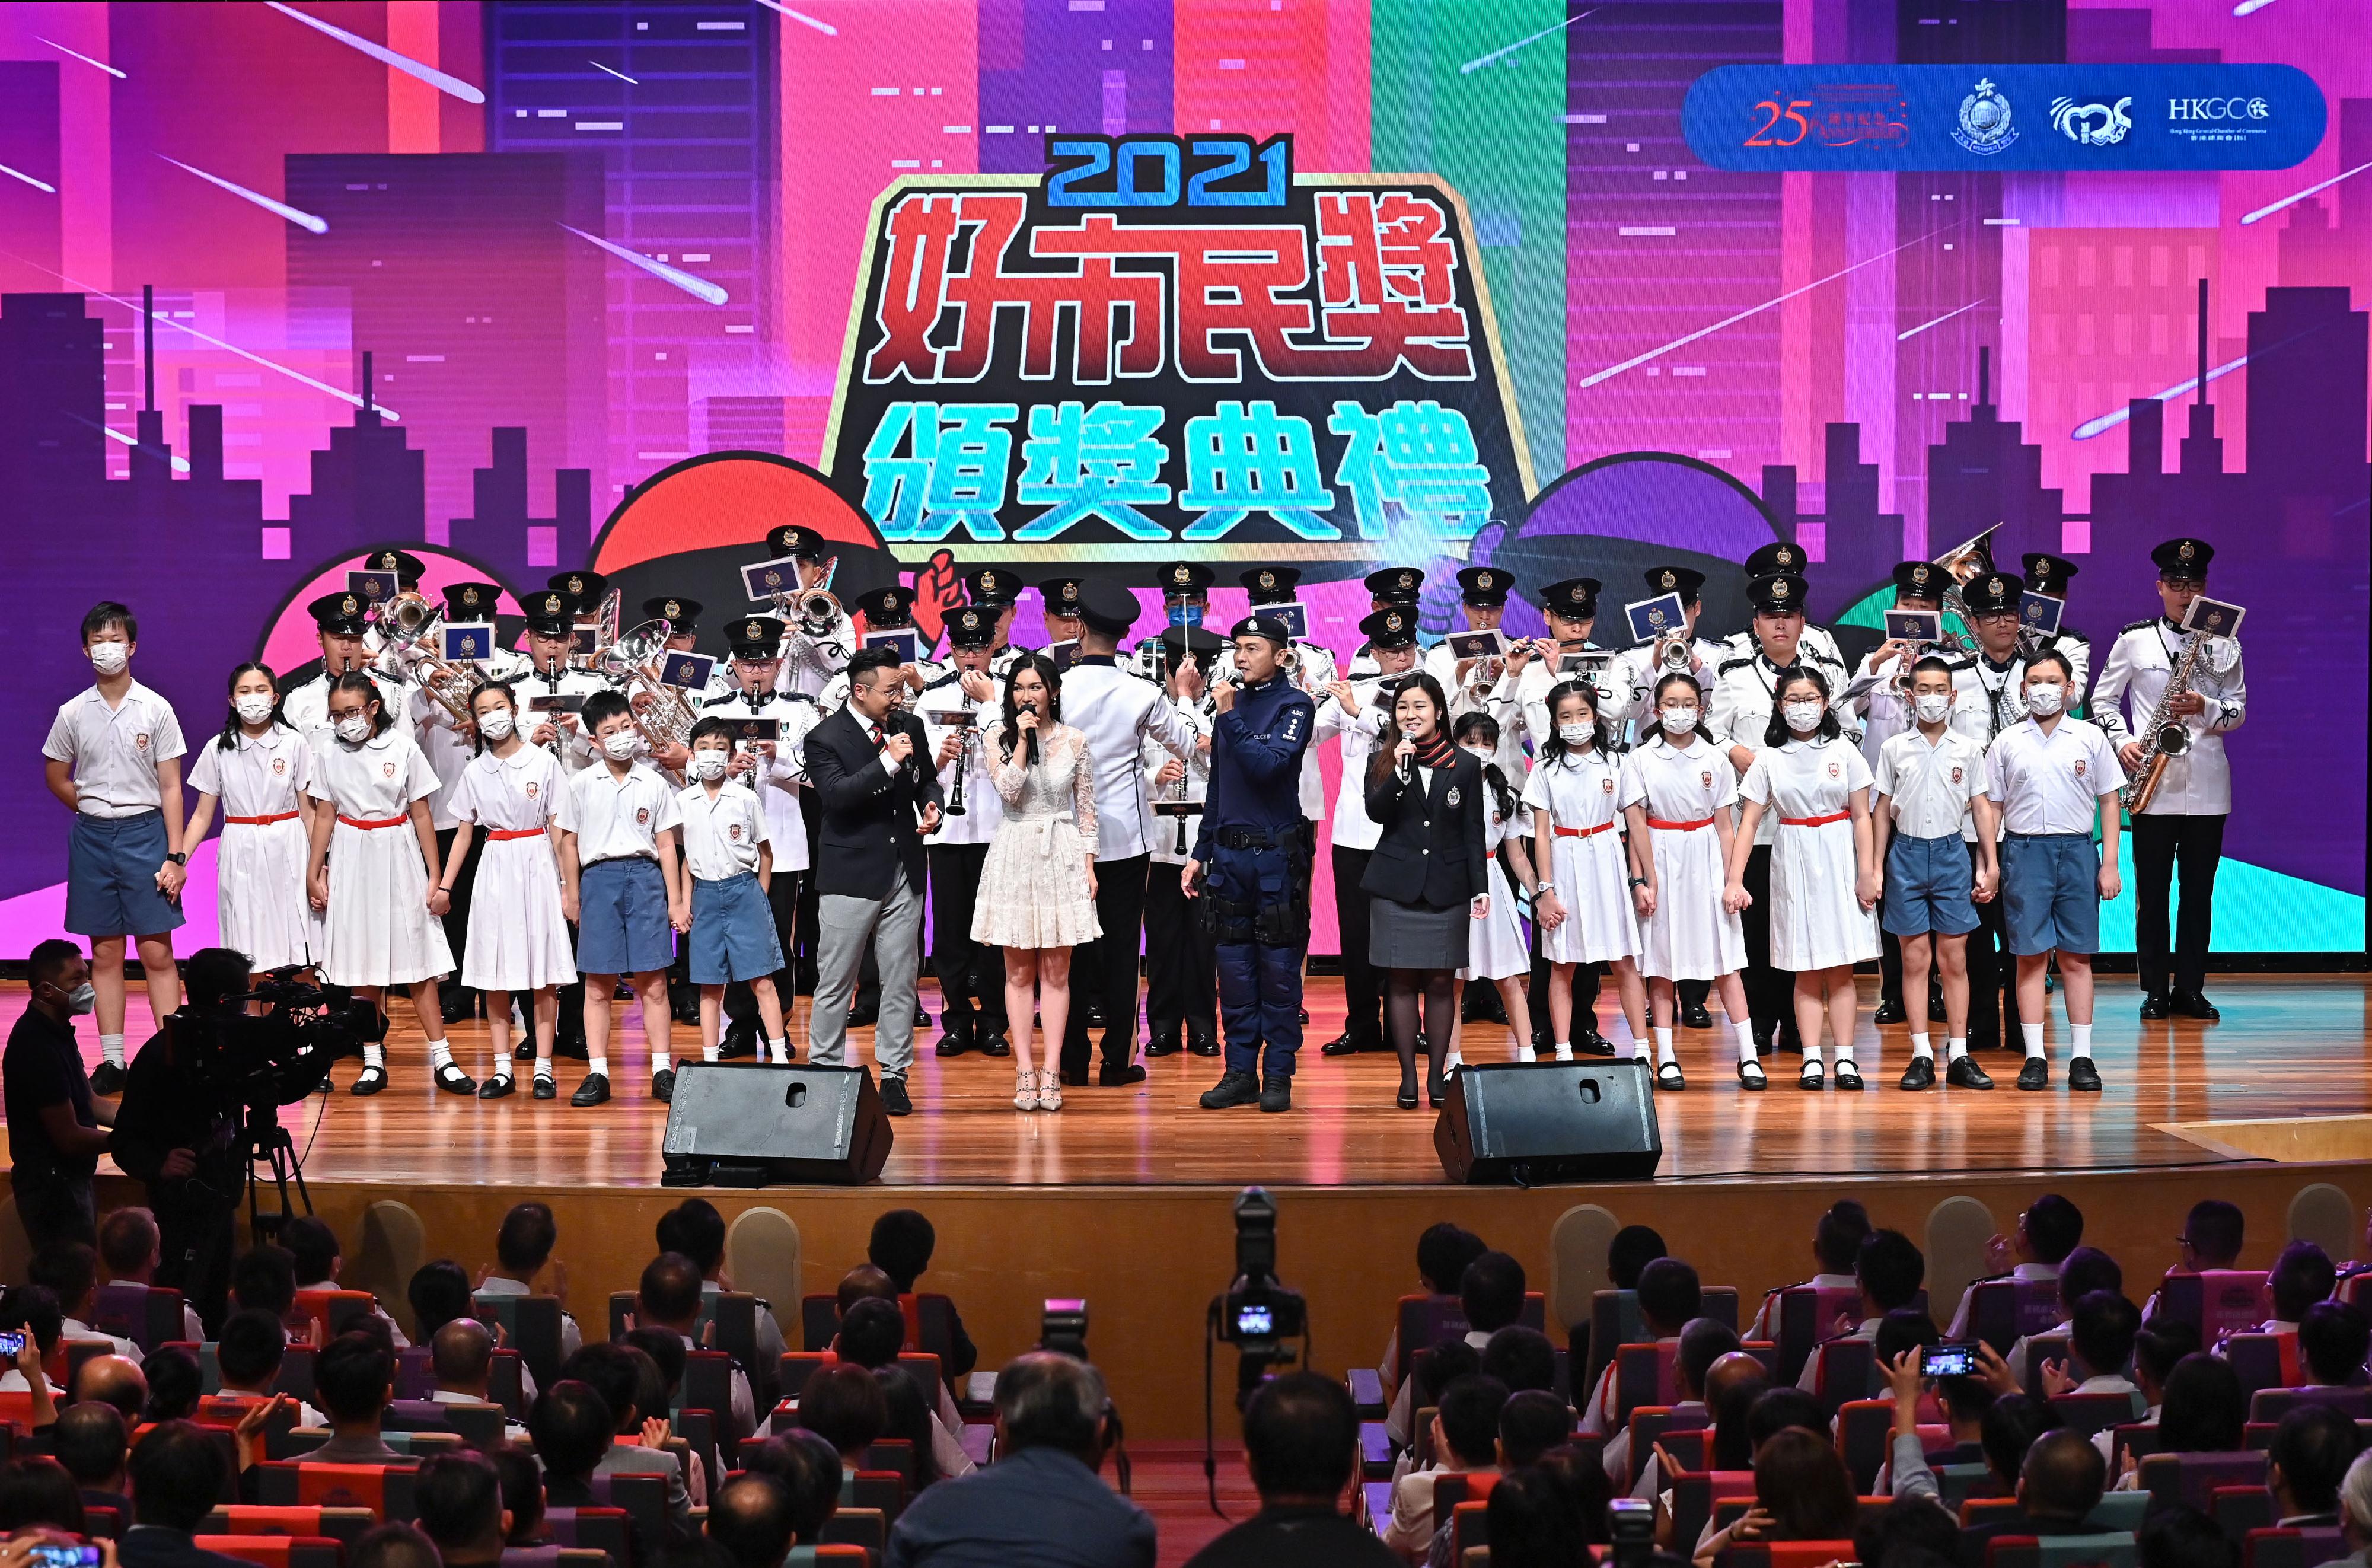 The Good Citizen Award Presentation Ceremony 2021 (Phase II) was held today (August 28). Photo shows performance to disseminate anti-crime messages.